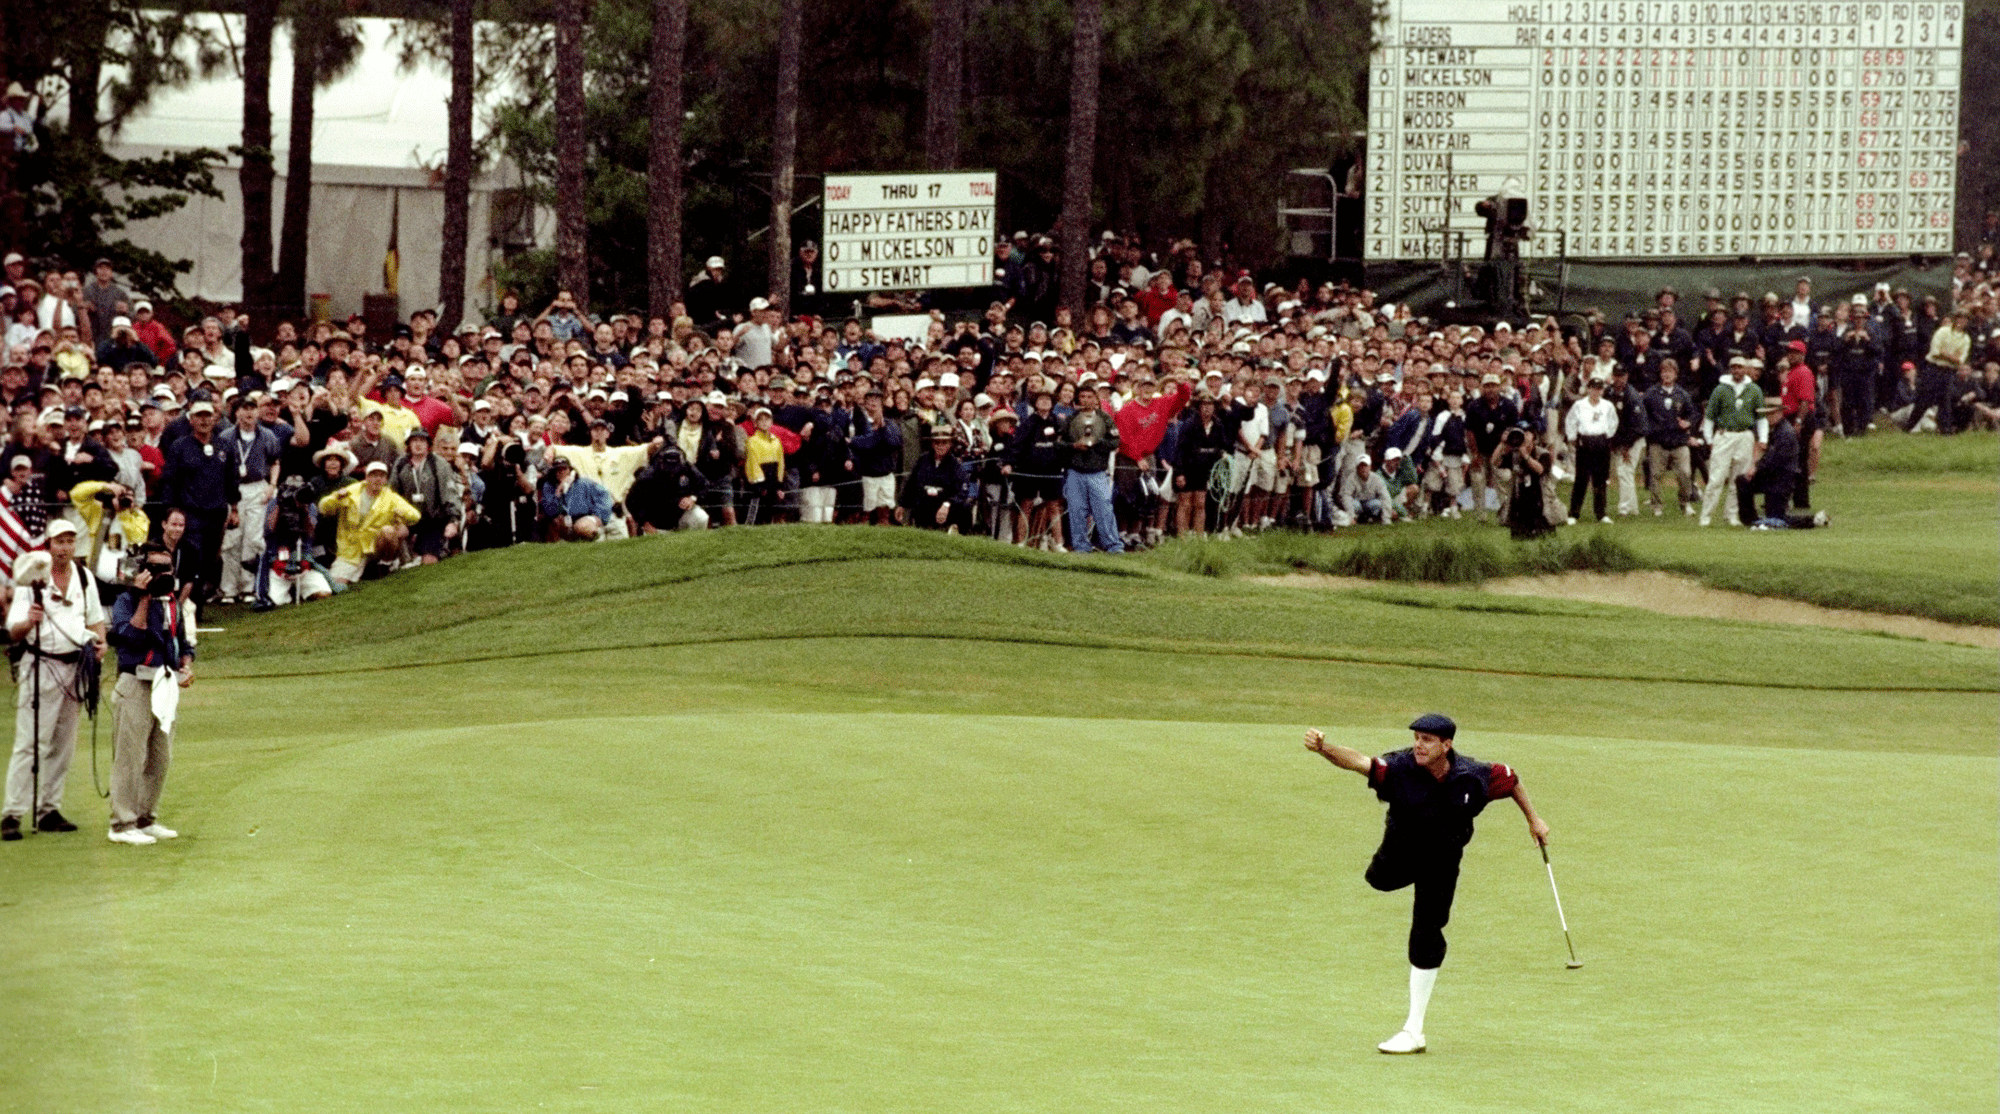 Stewart punctuated his win at the 1999 U.S. Open with an indelible fist pump.